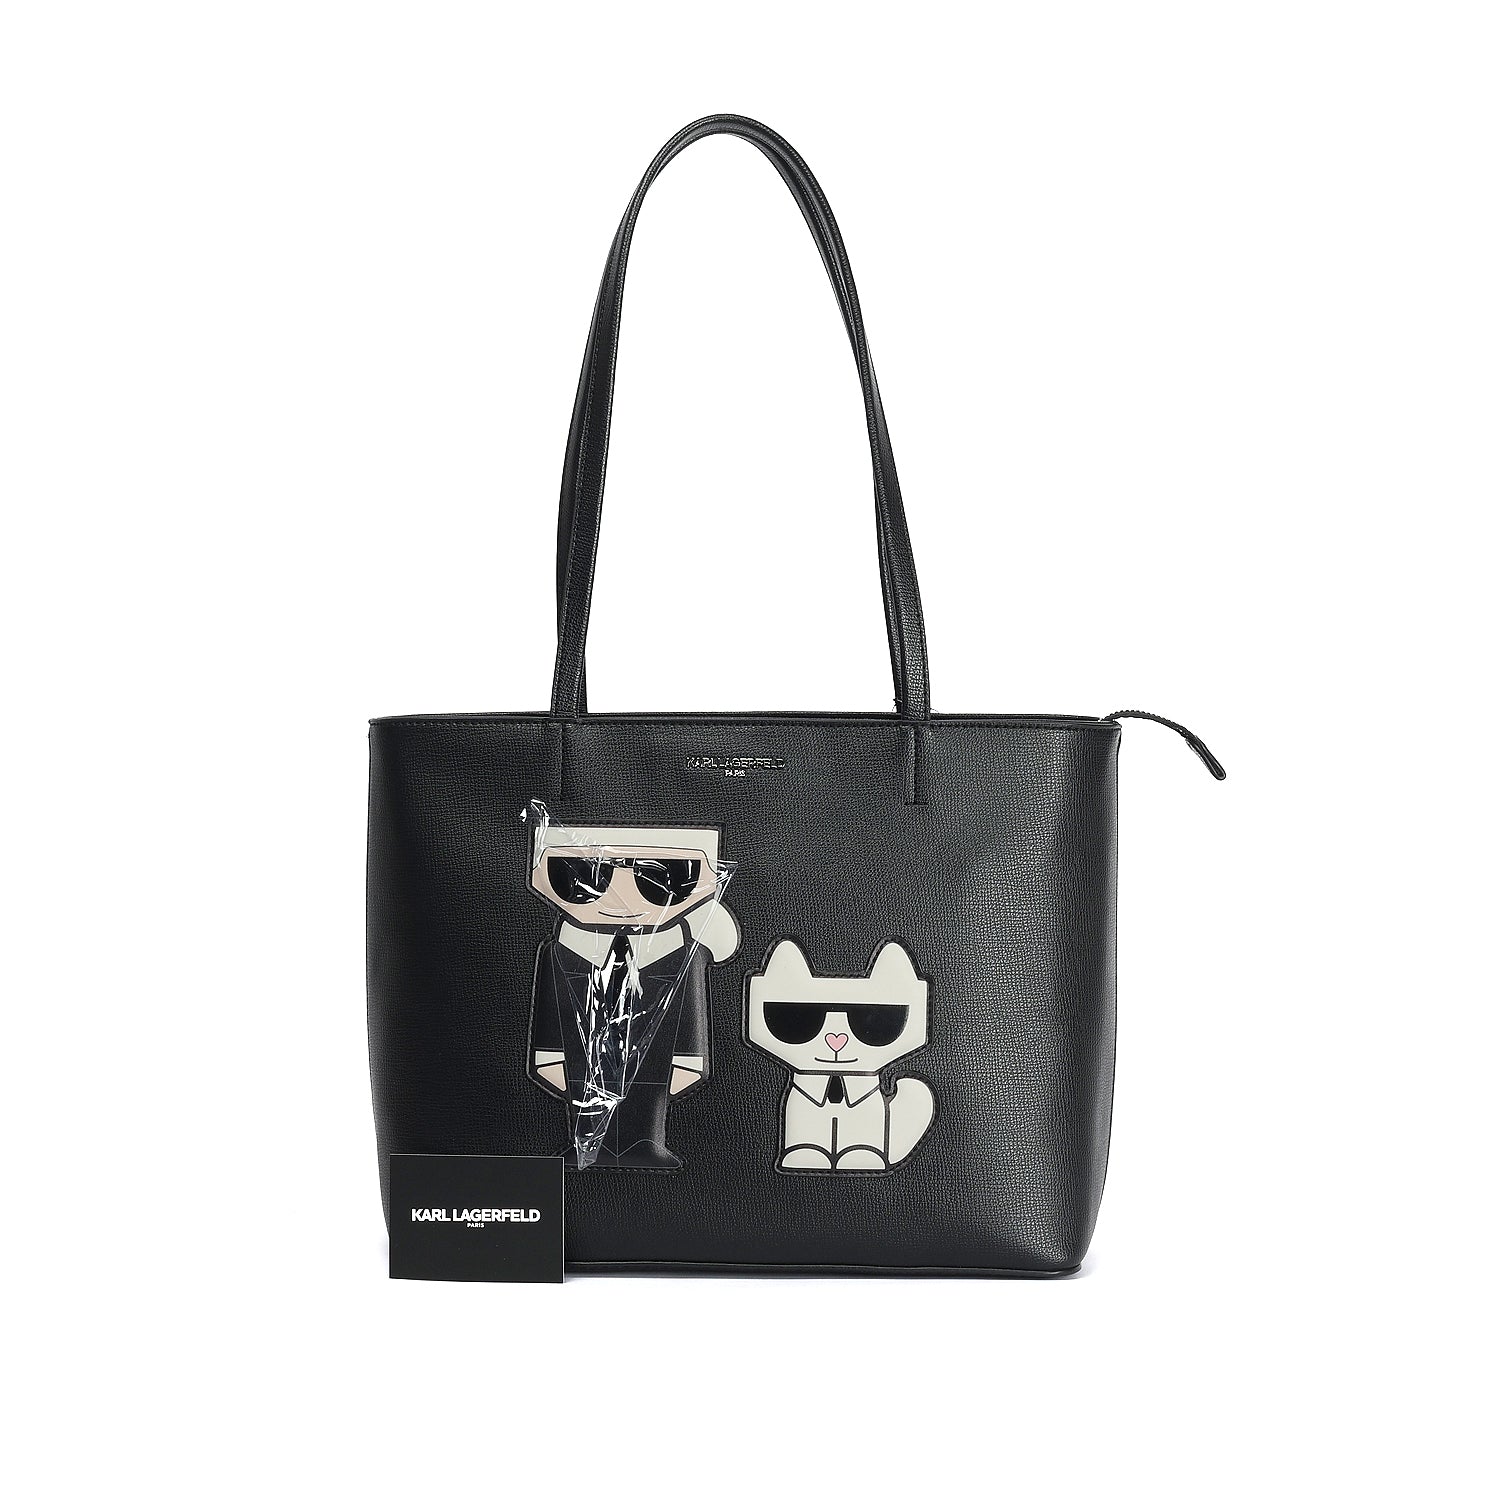 Maybelle Zipper Tote